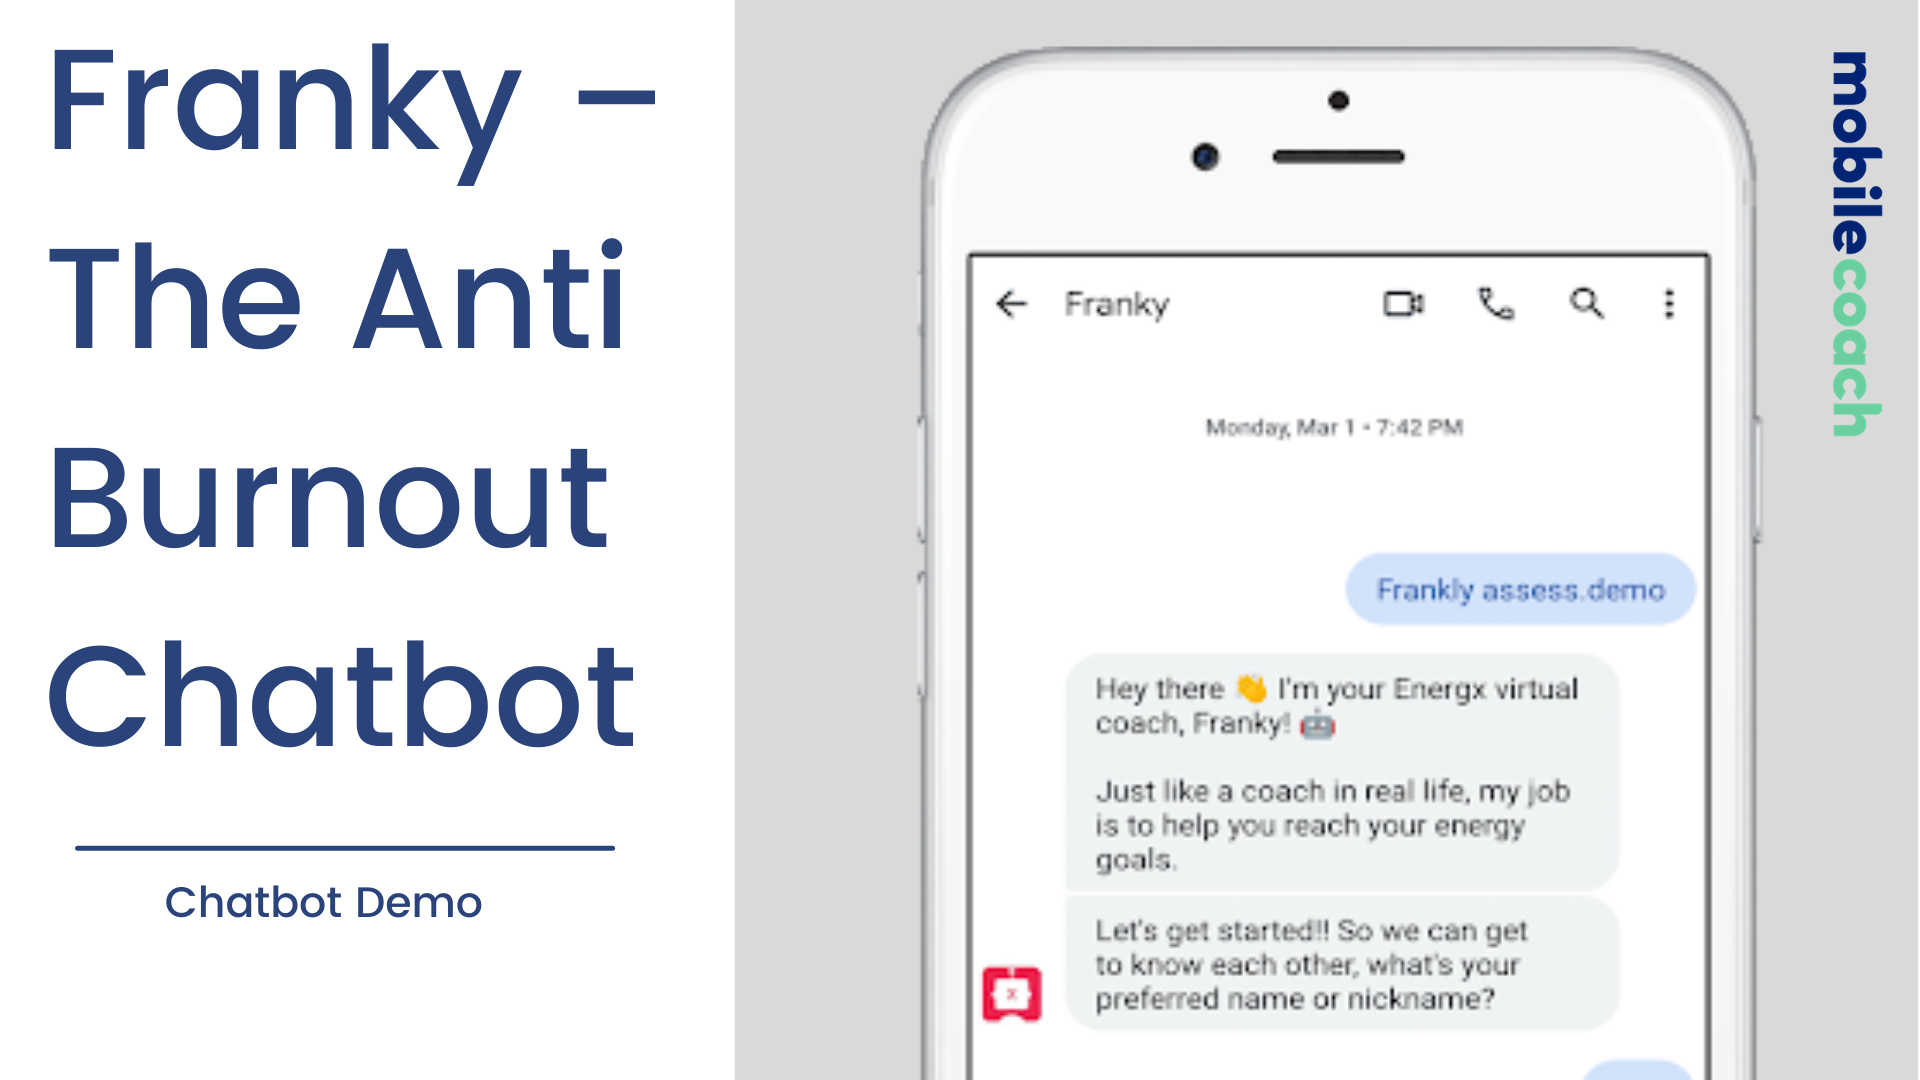 franky burnout chatbot featured image